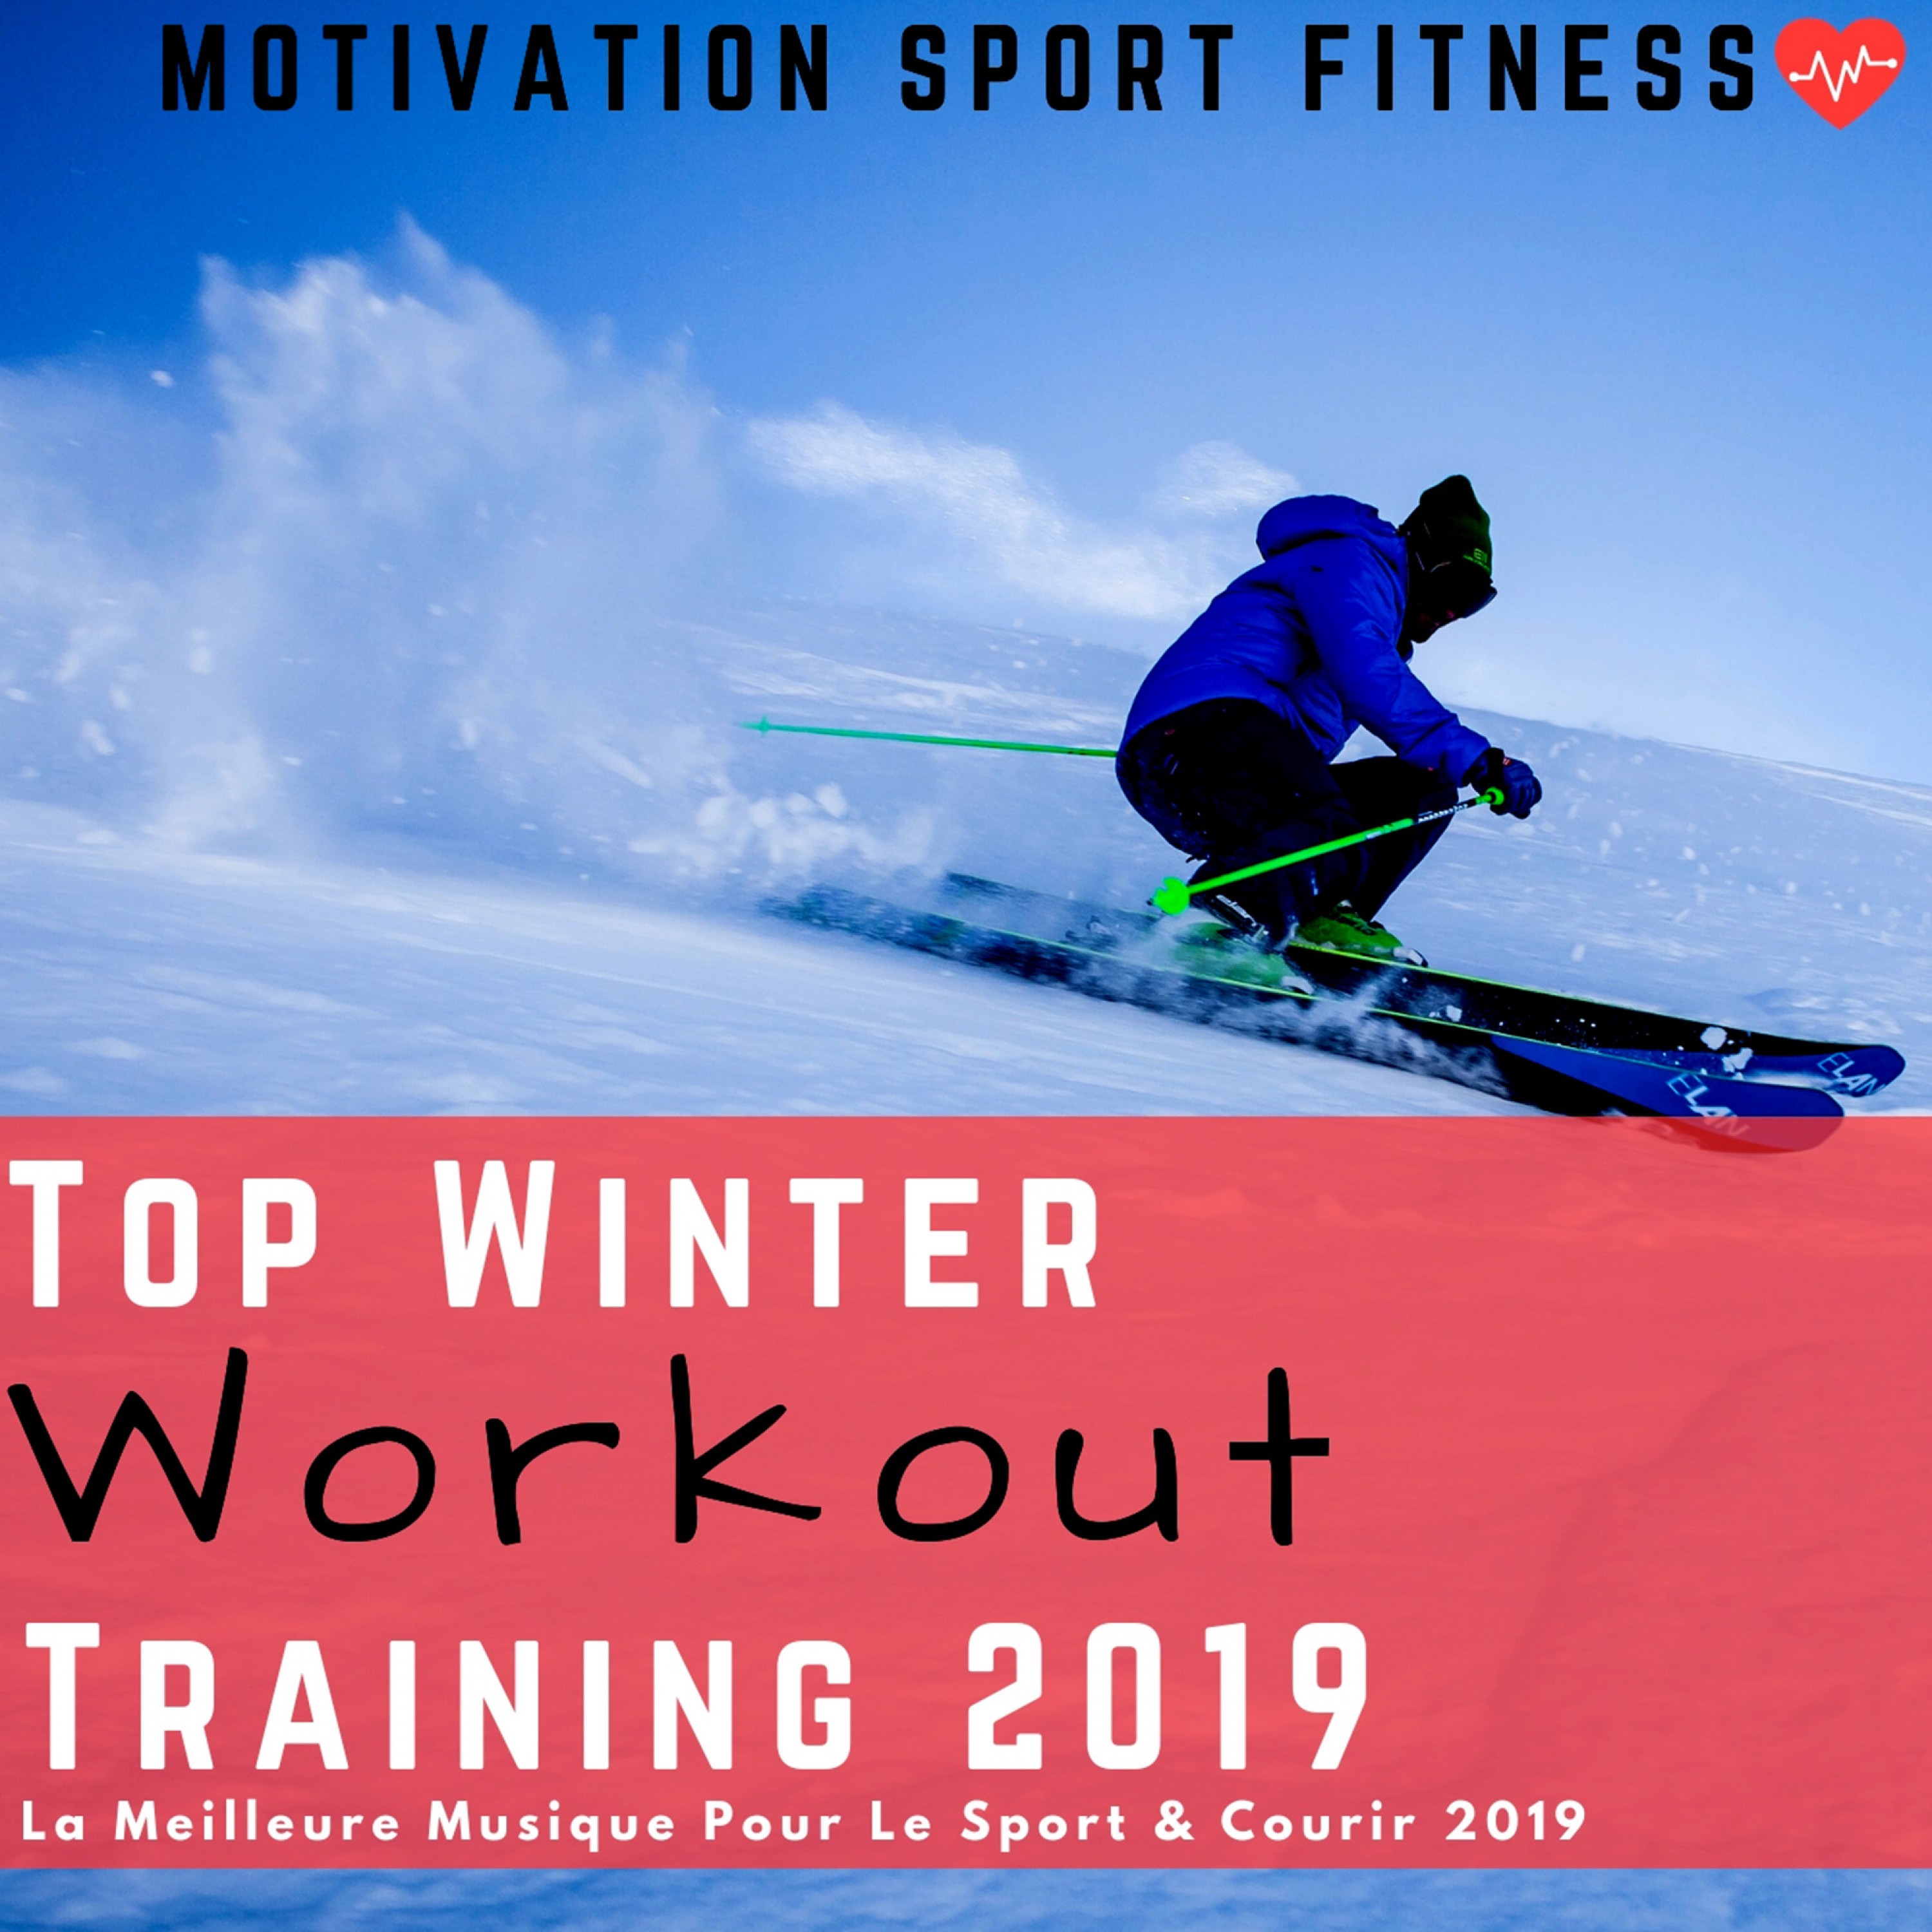 Top Winter Workout Training 2019